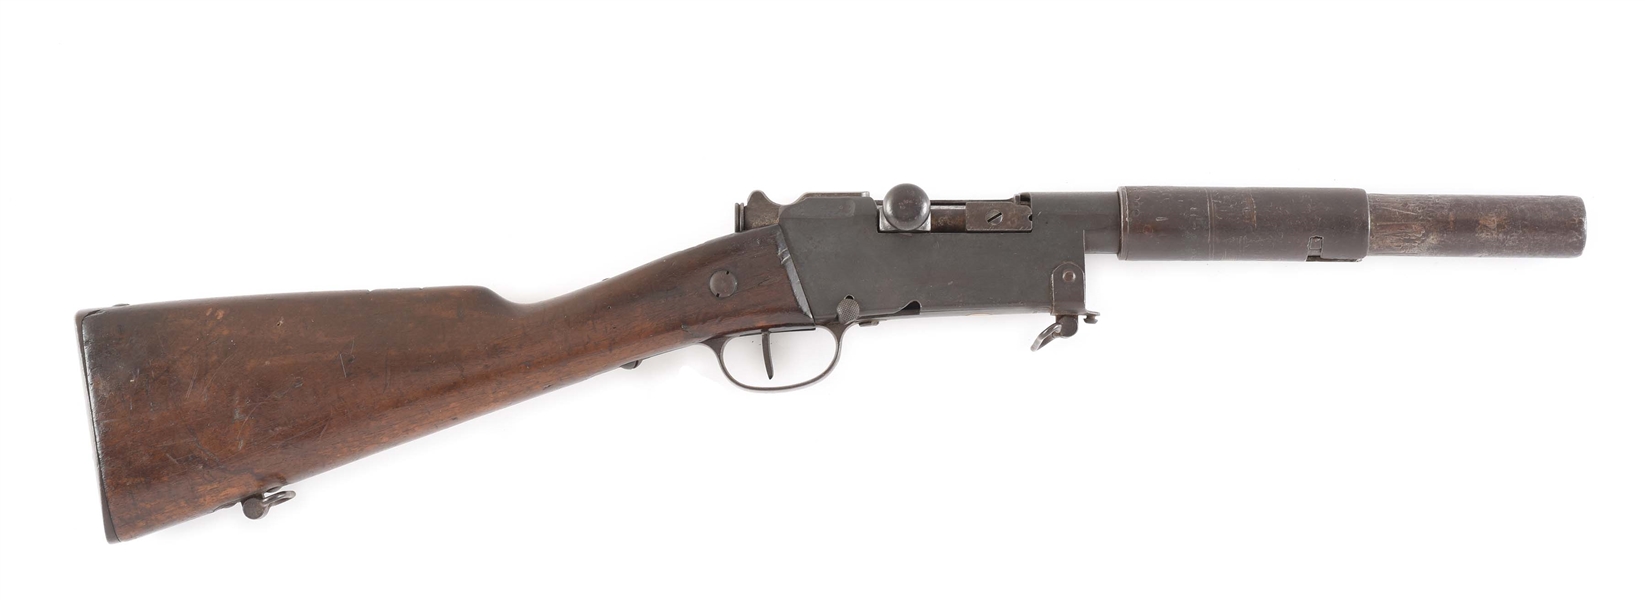 RARE WWI GERMAN UNIT MARKED CONVERSION OF FRENCH LEBEL RIFLE TO SIGNAL CARBINE.